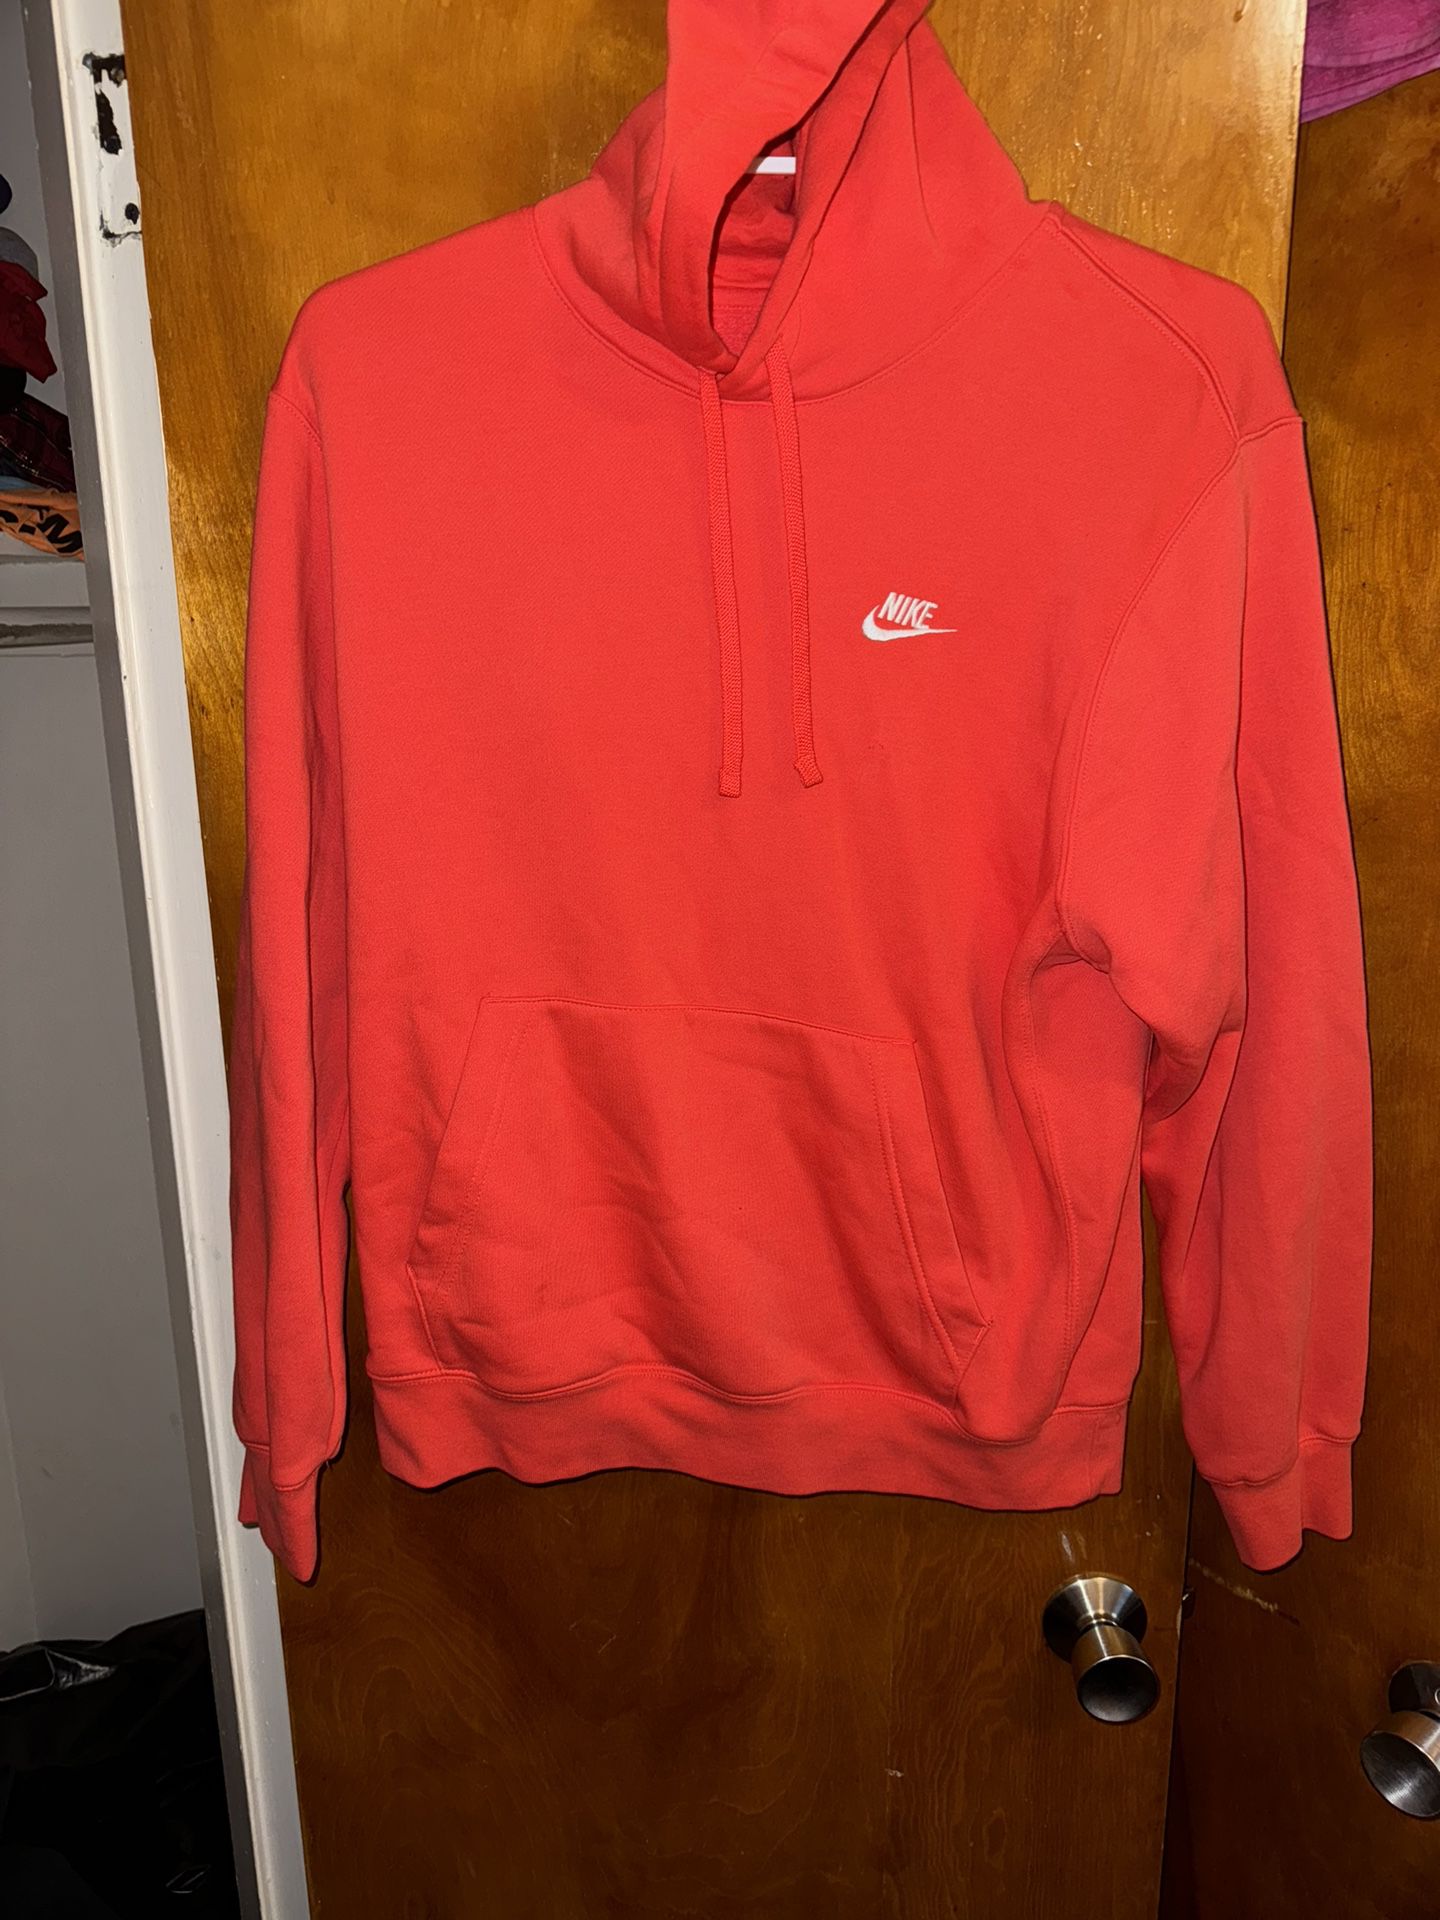 Men’s size, a large red Nike Hoodie 